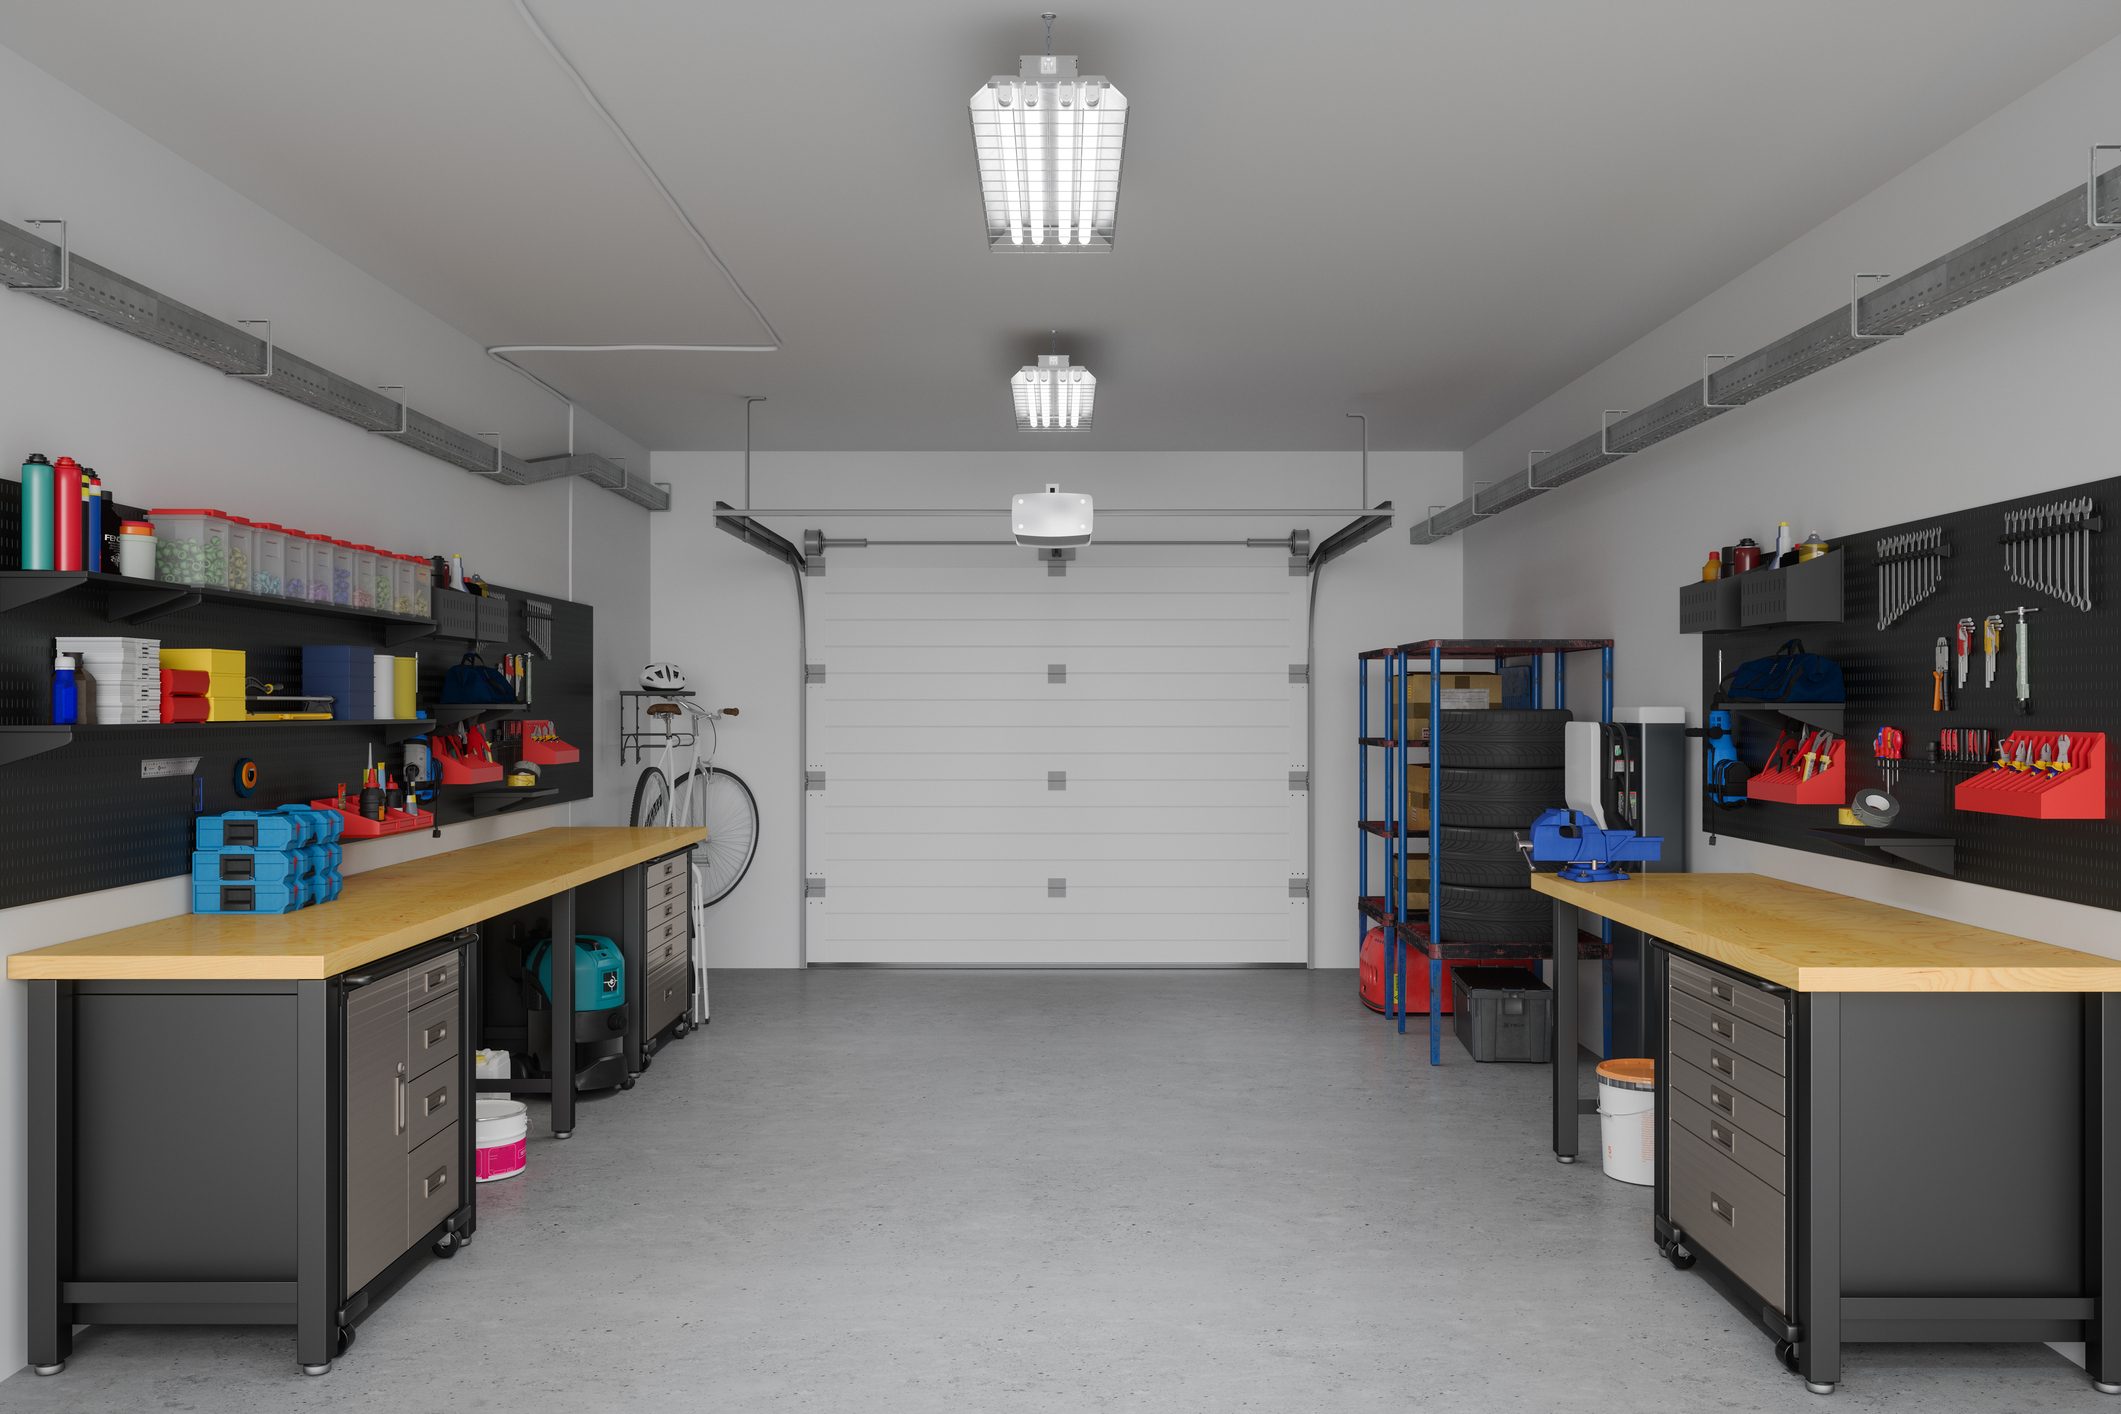 Why Convert a Shipping Container Into a Garage?